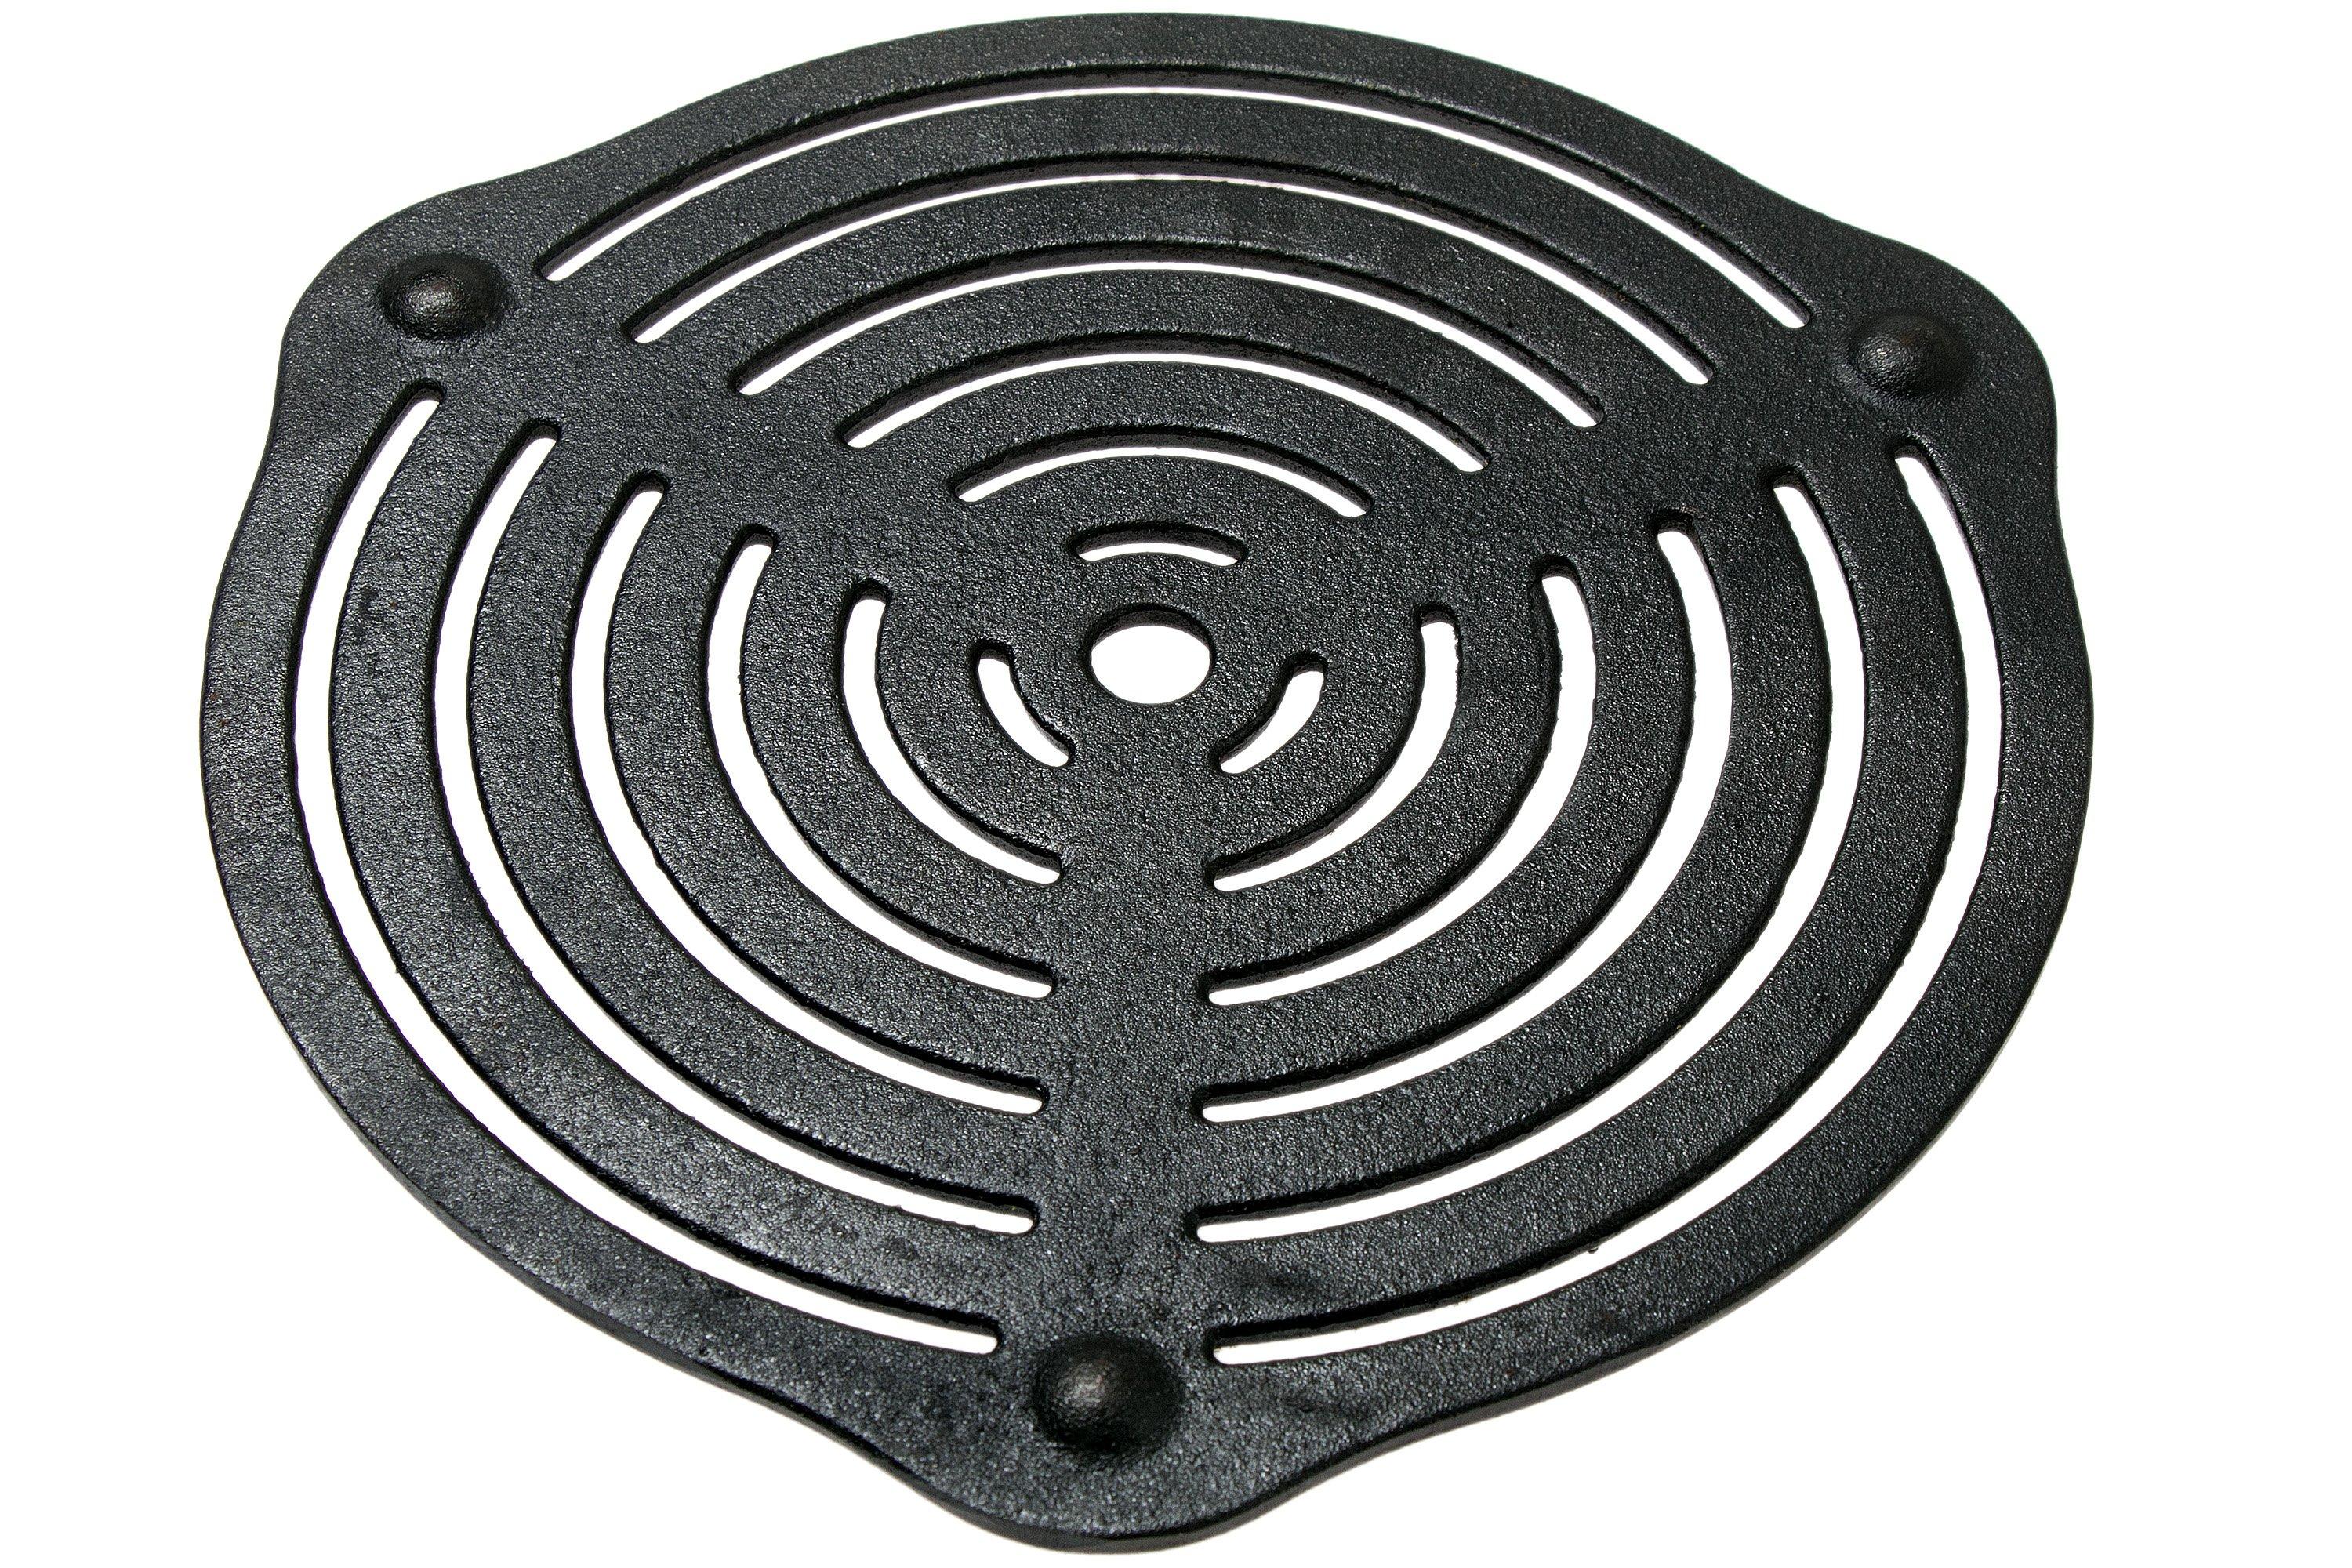  Petromax Cast Iron Trivet, Use in Dutch Ovens to Reduce  Burning, Grill Meat Directly in a Campfire or as a Trivet for Hot Pots in  Fire or on Table: Home 